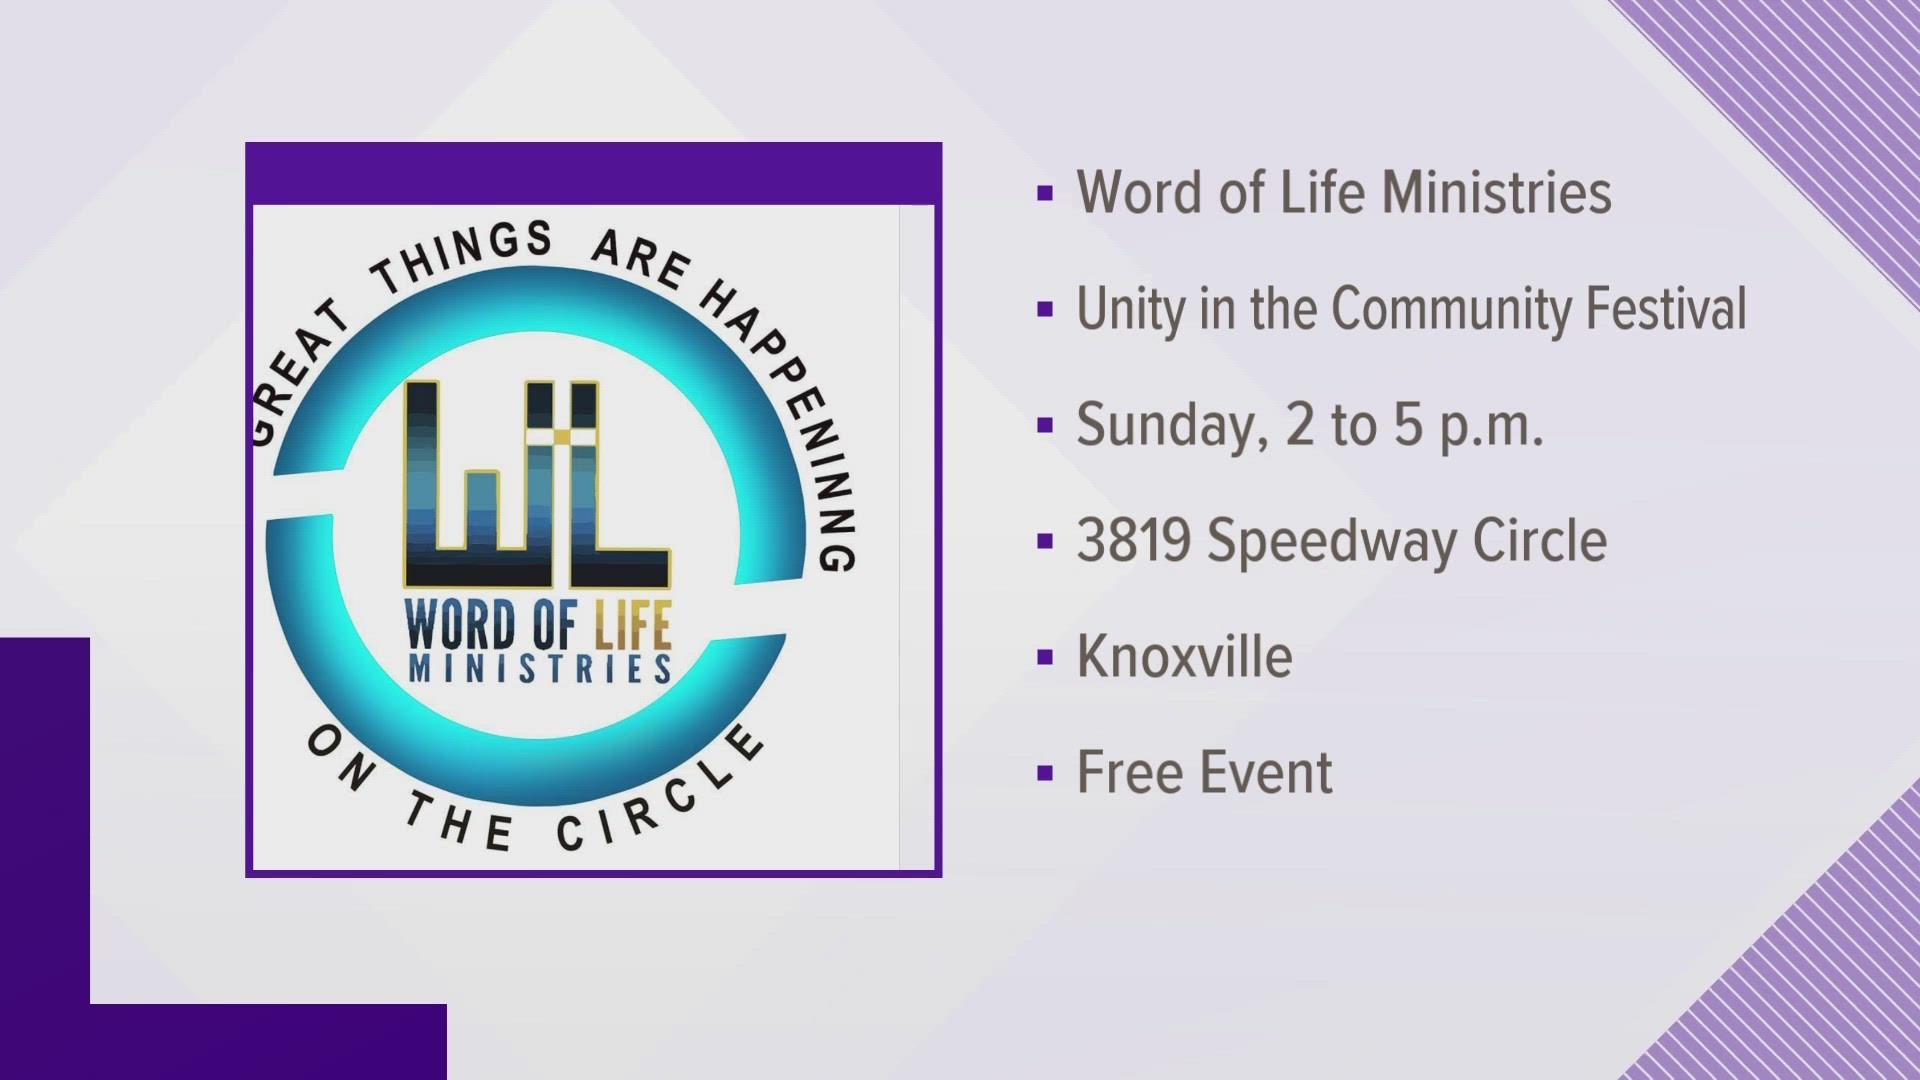 The event is hosted by Word of Life Ministries, in Knoxville's Burlington community.